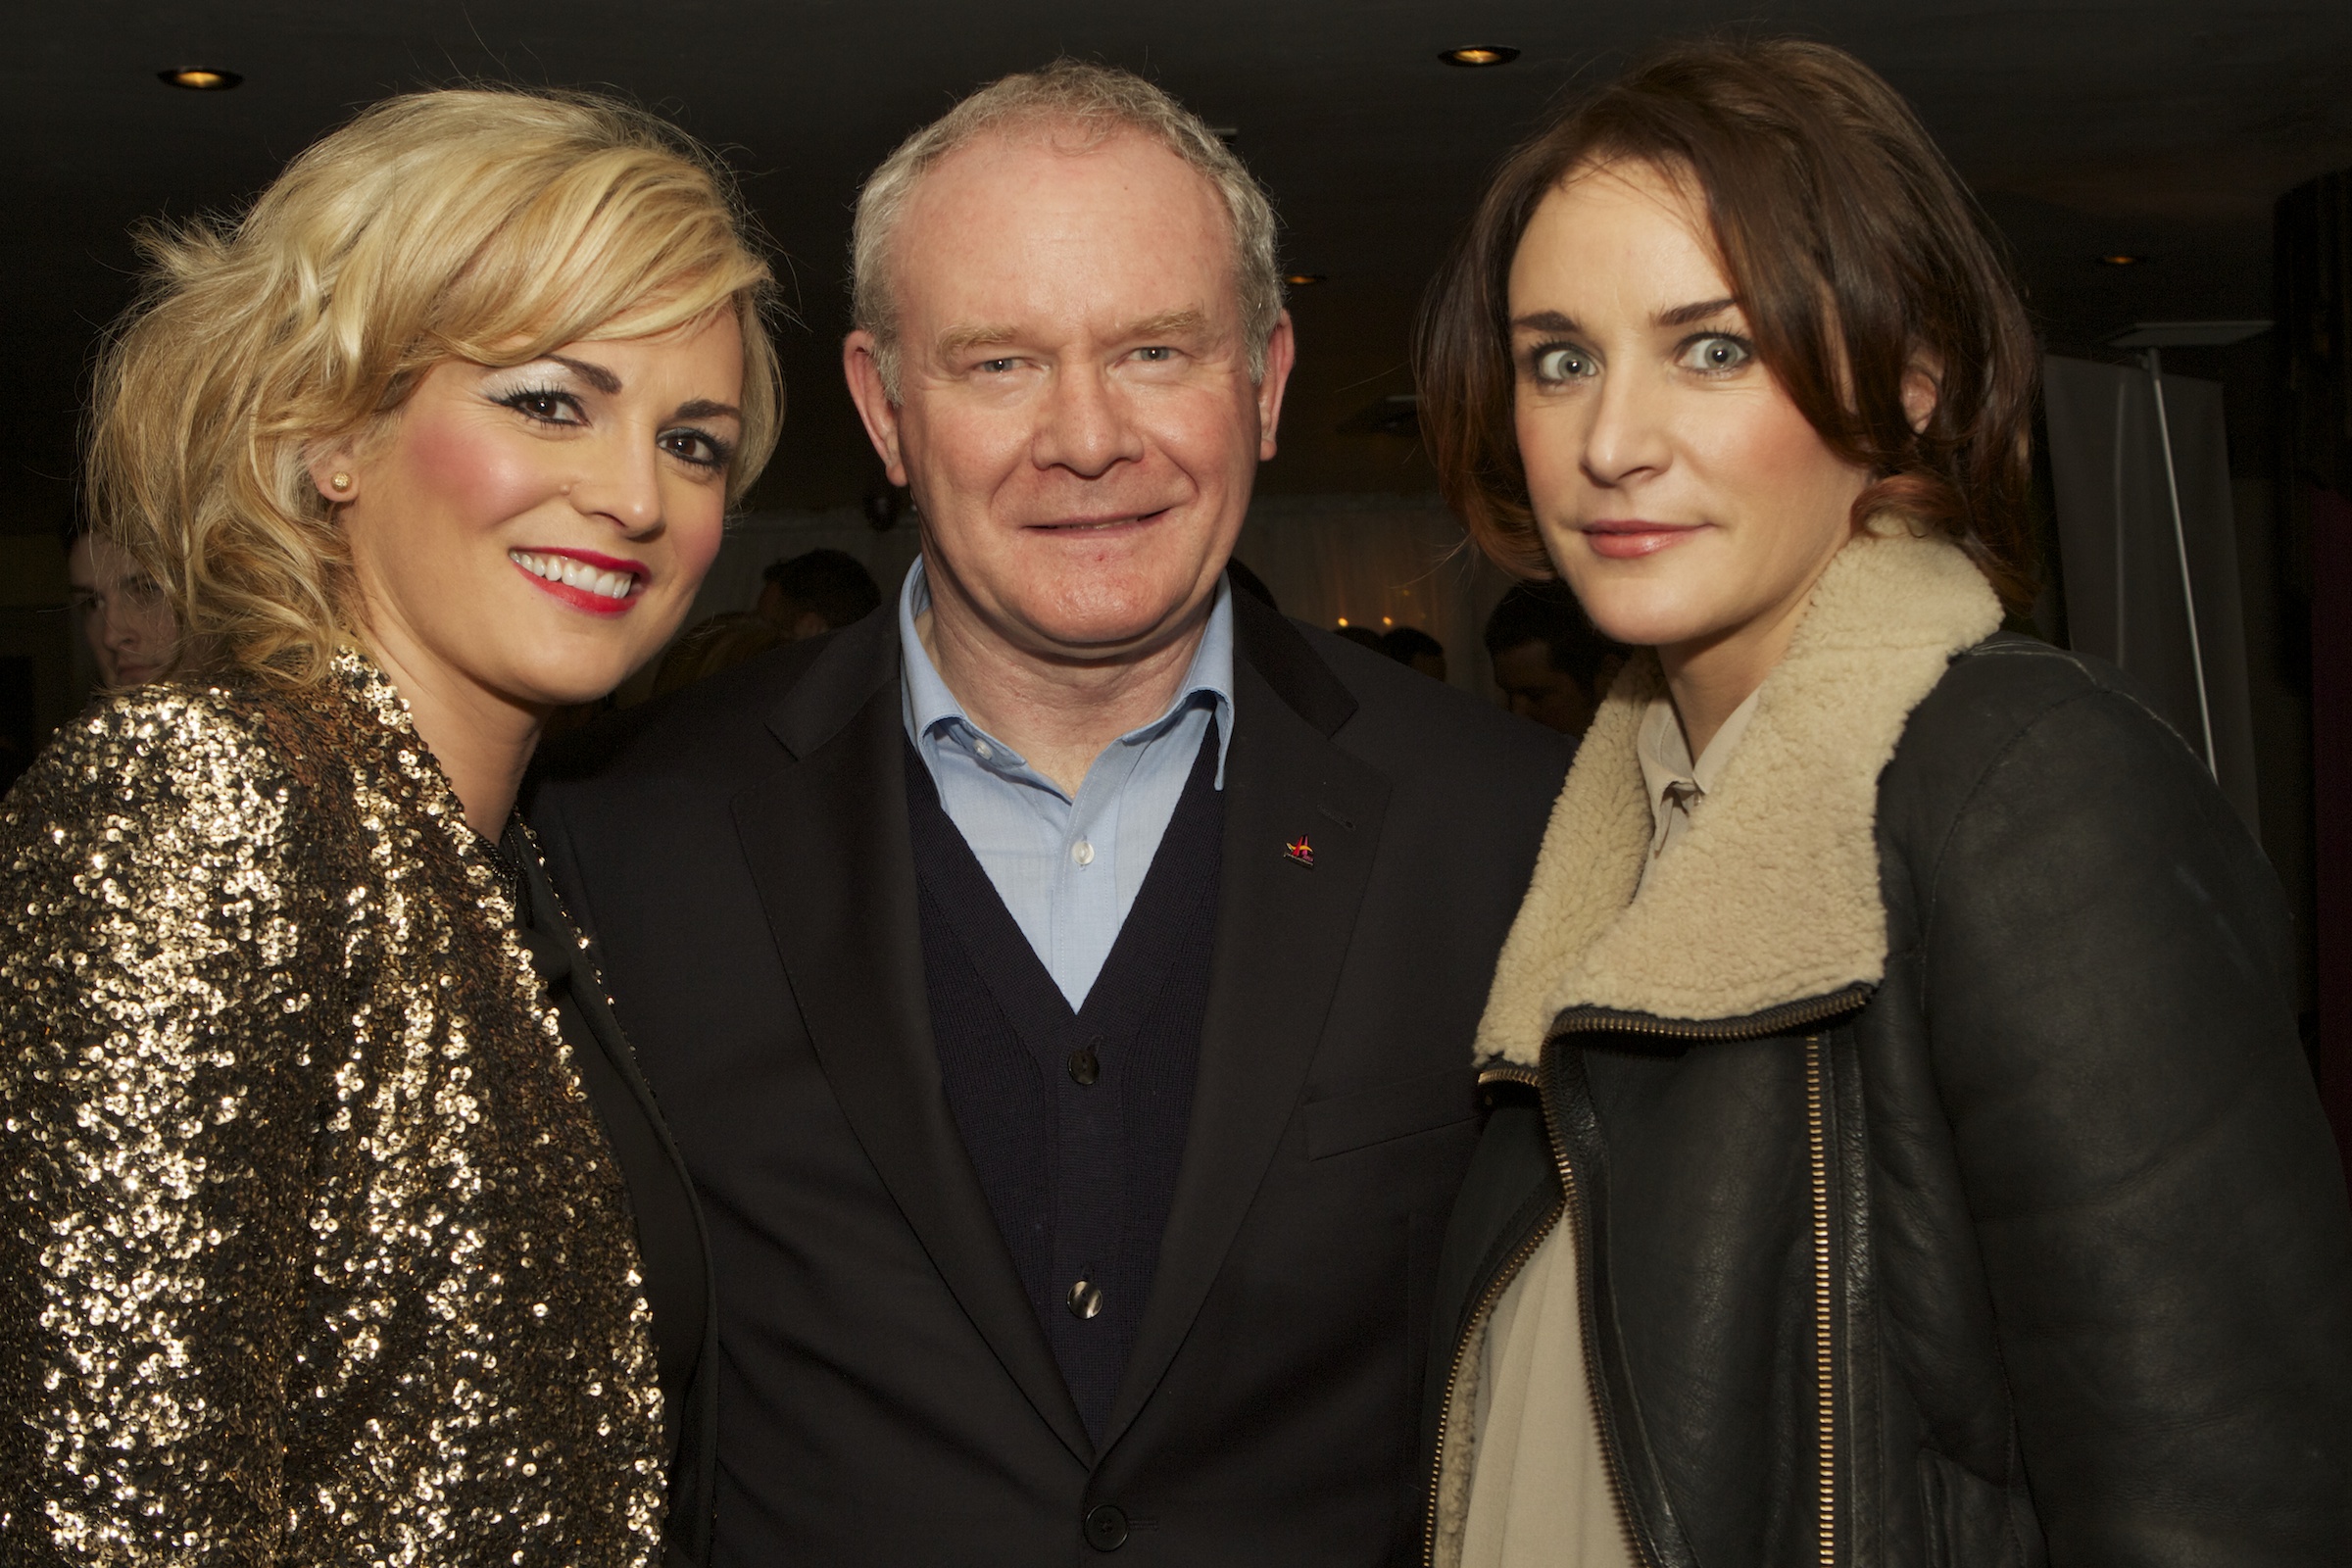 Martin with daughters Grianne and Fionnuala.